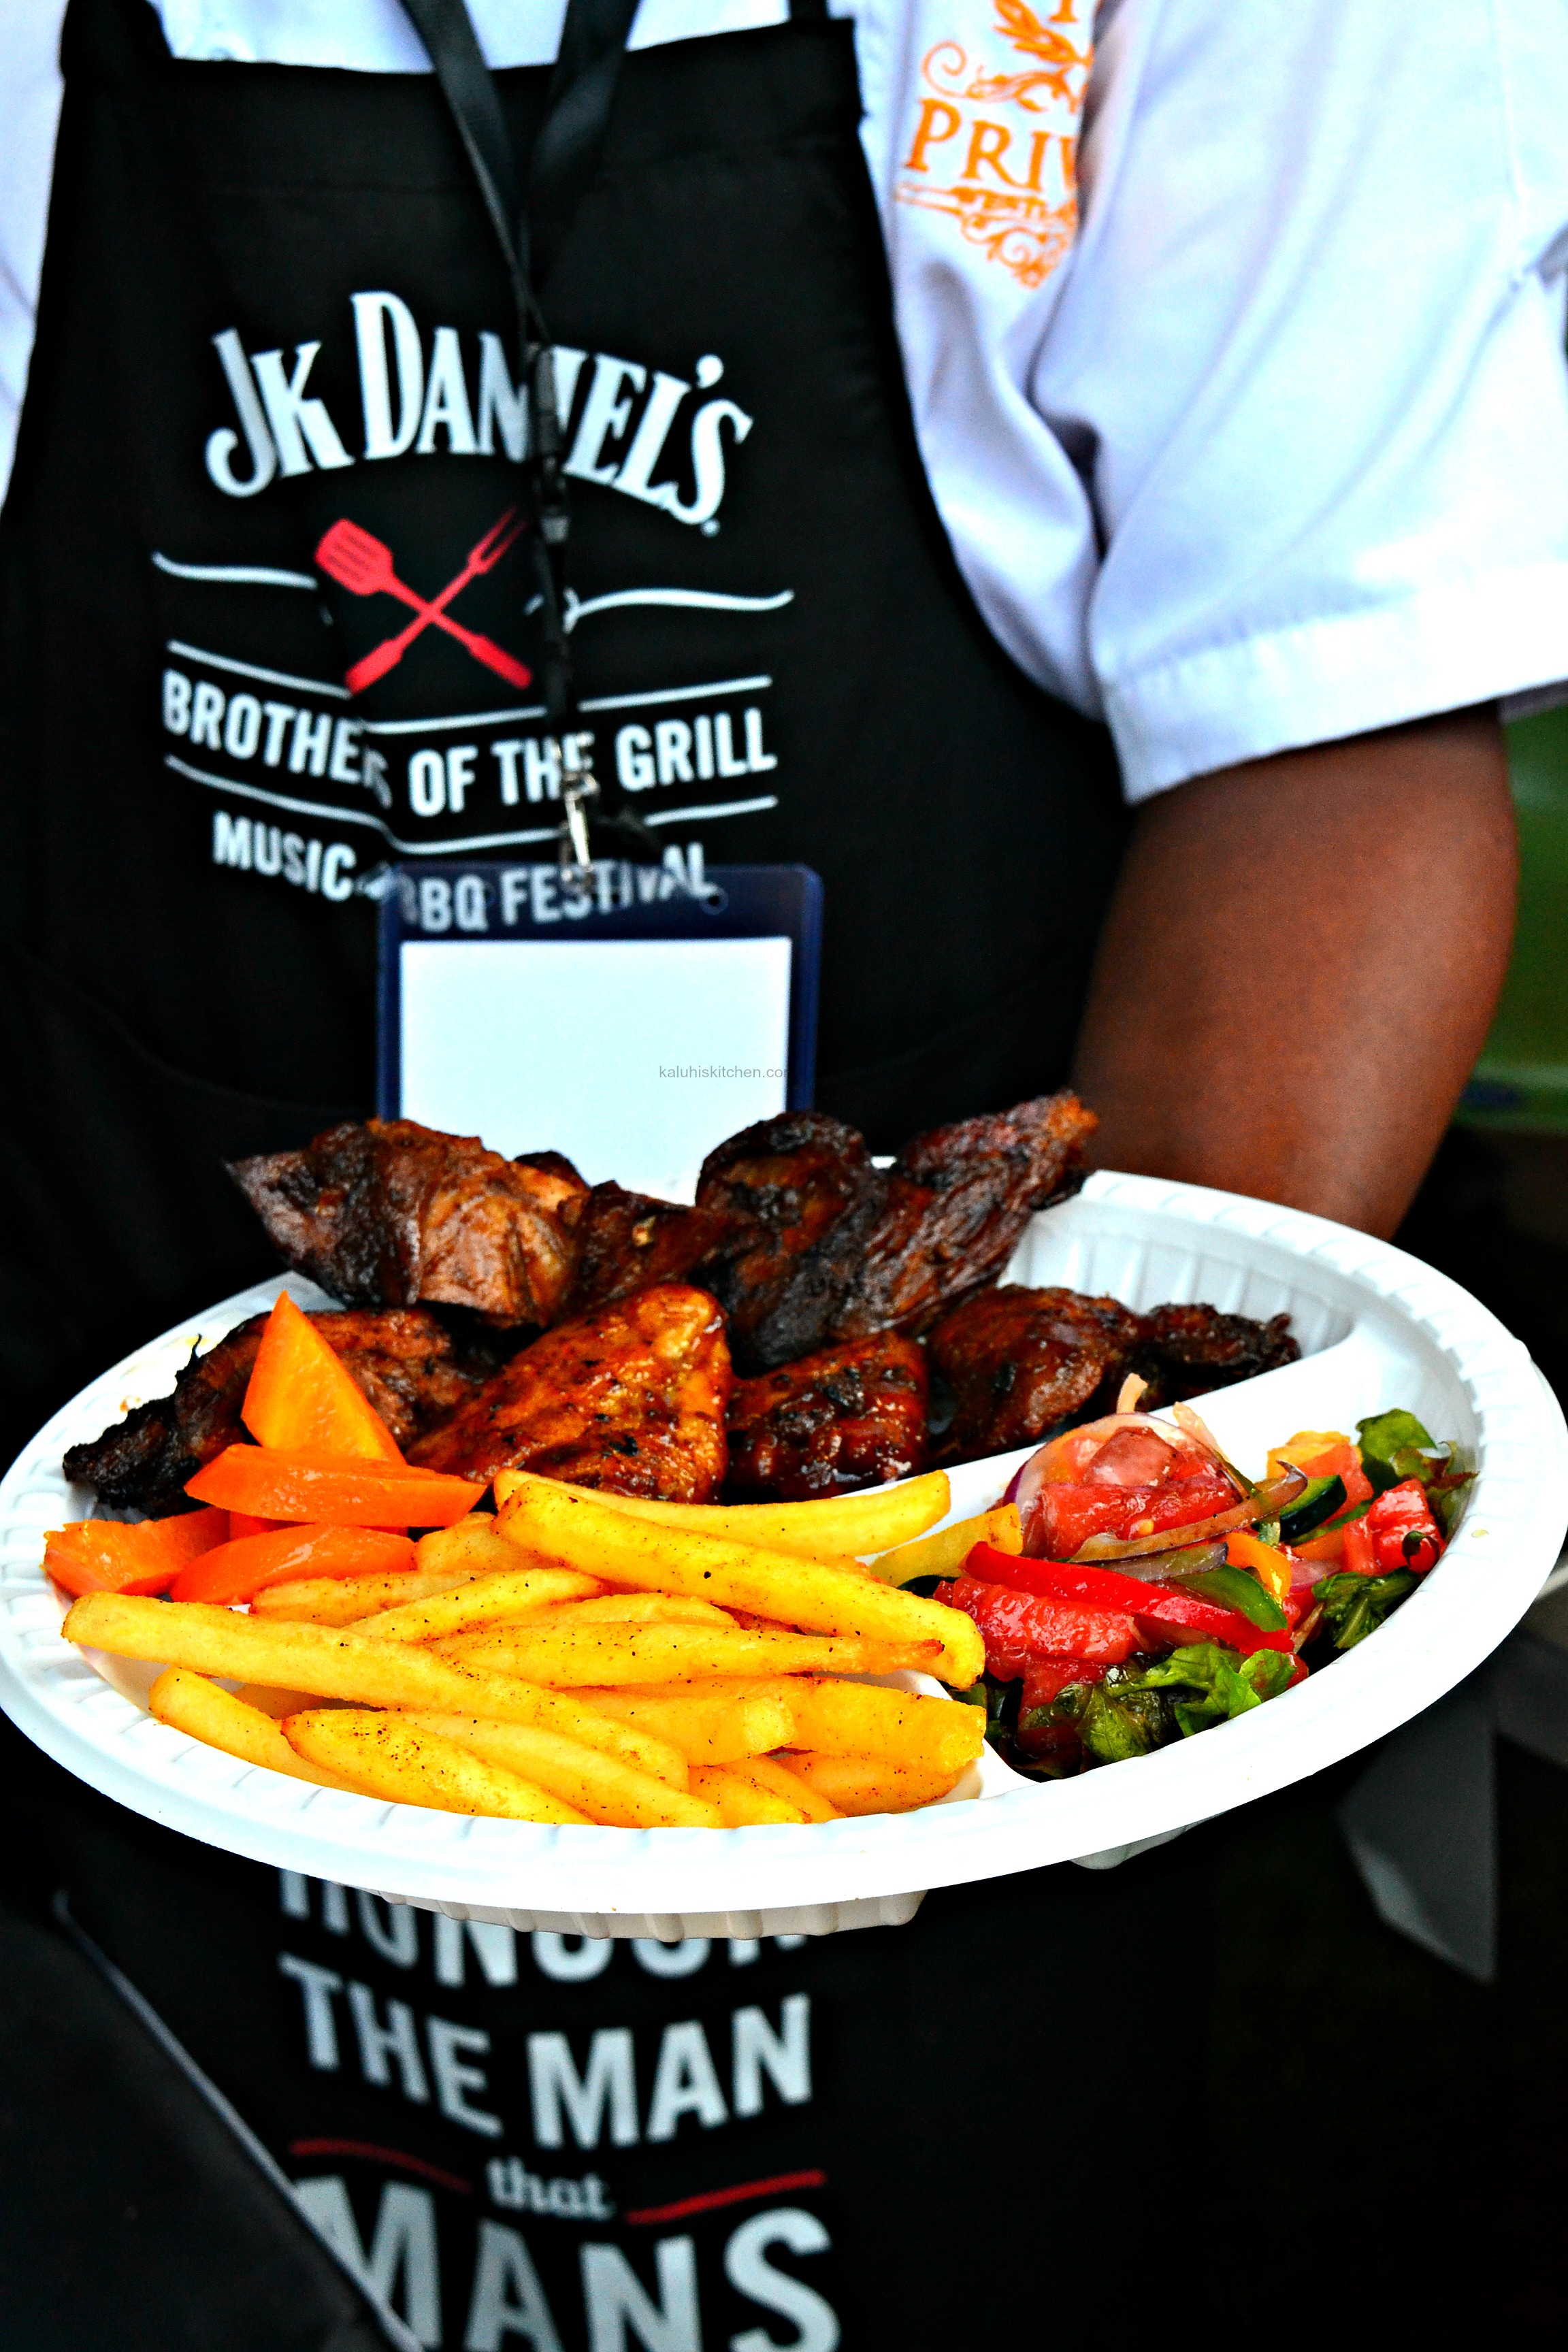 each entrant to the brothers of the grill has five food vouchers_the vouchers are generous and very sufficient for all_kaluhiskitchen.com